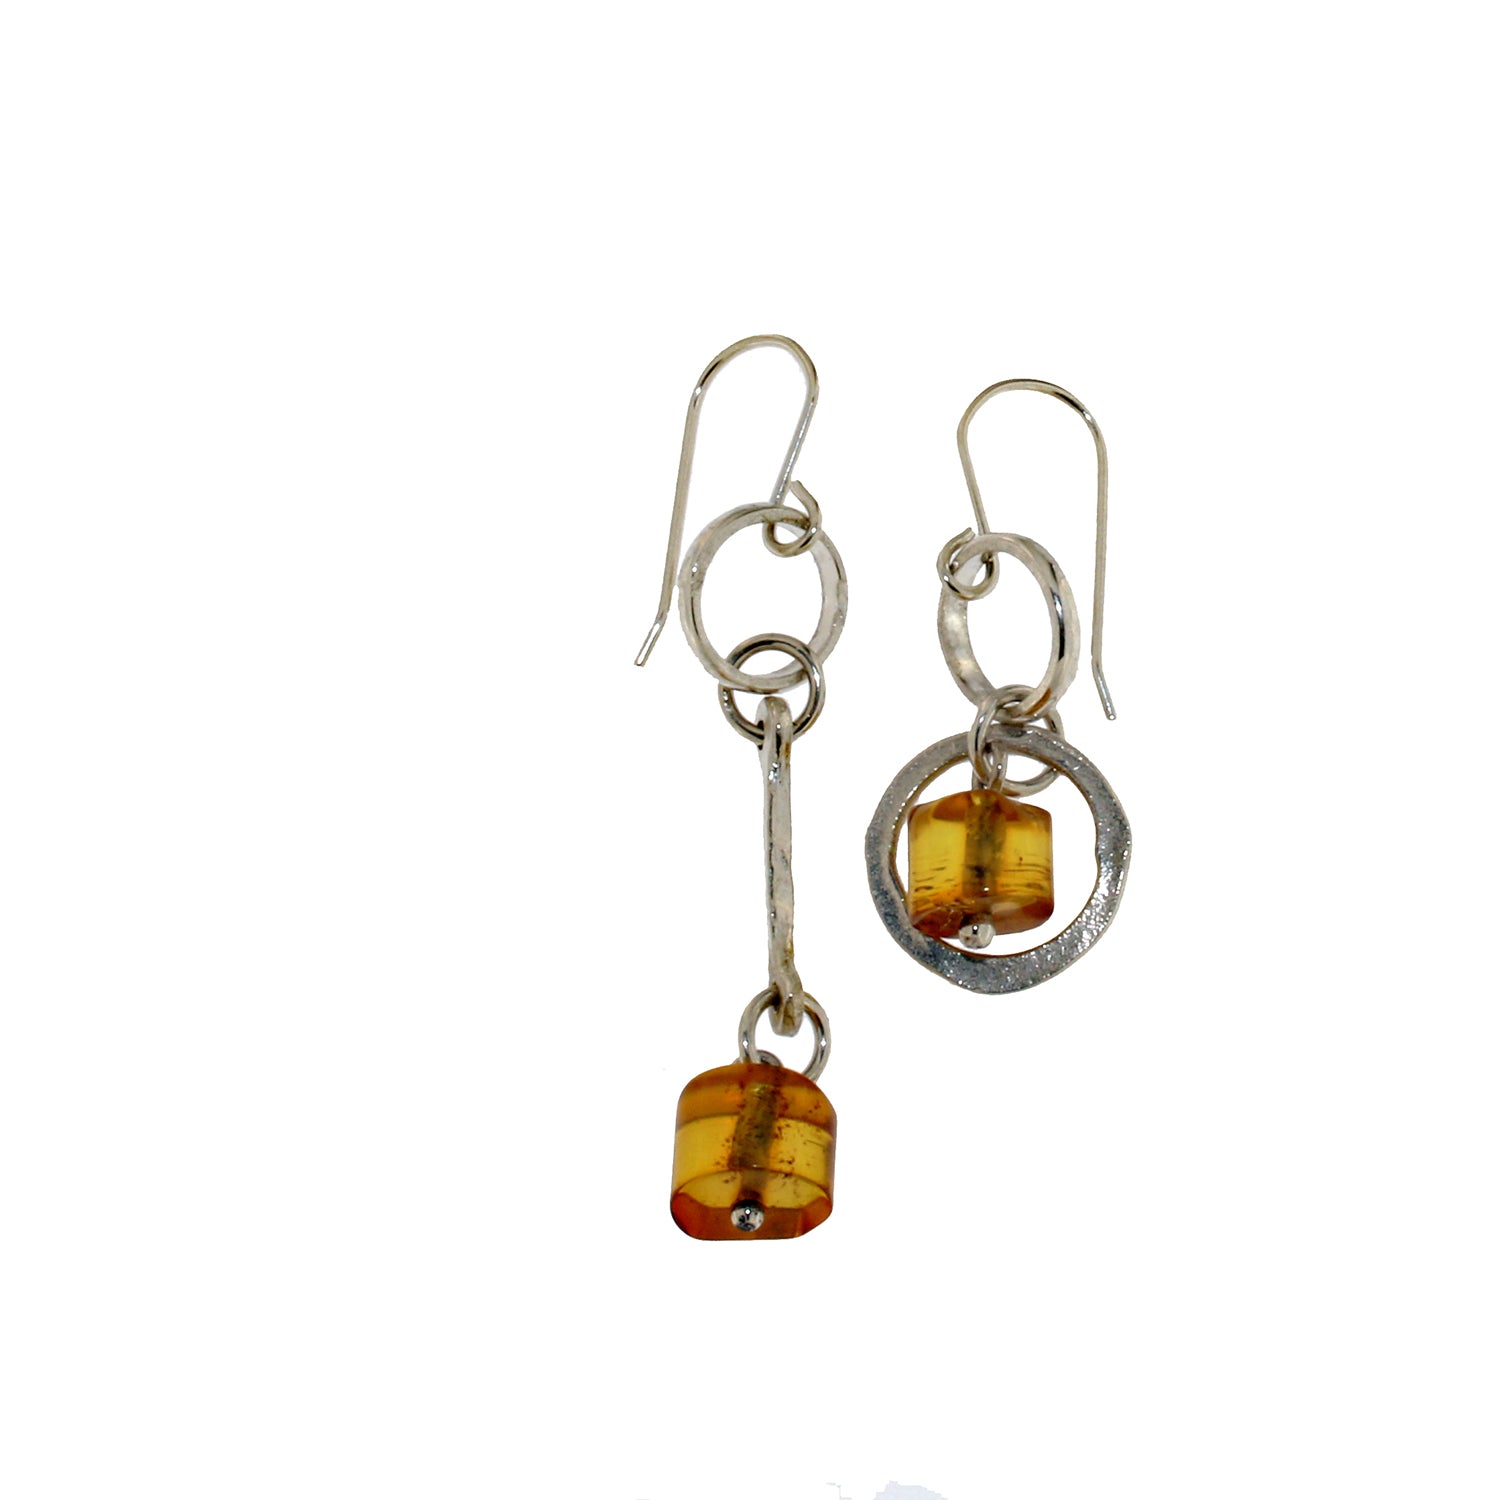 Stix & Stones Silver and Amber Mismatched Earrings